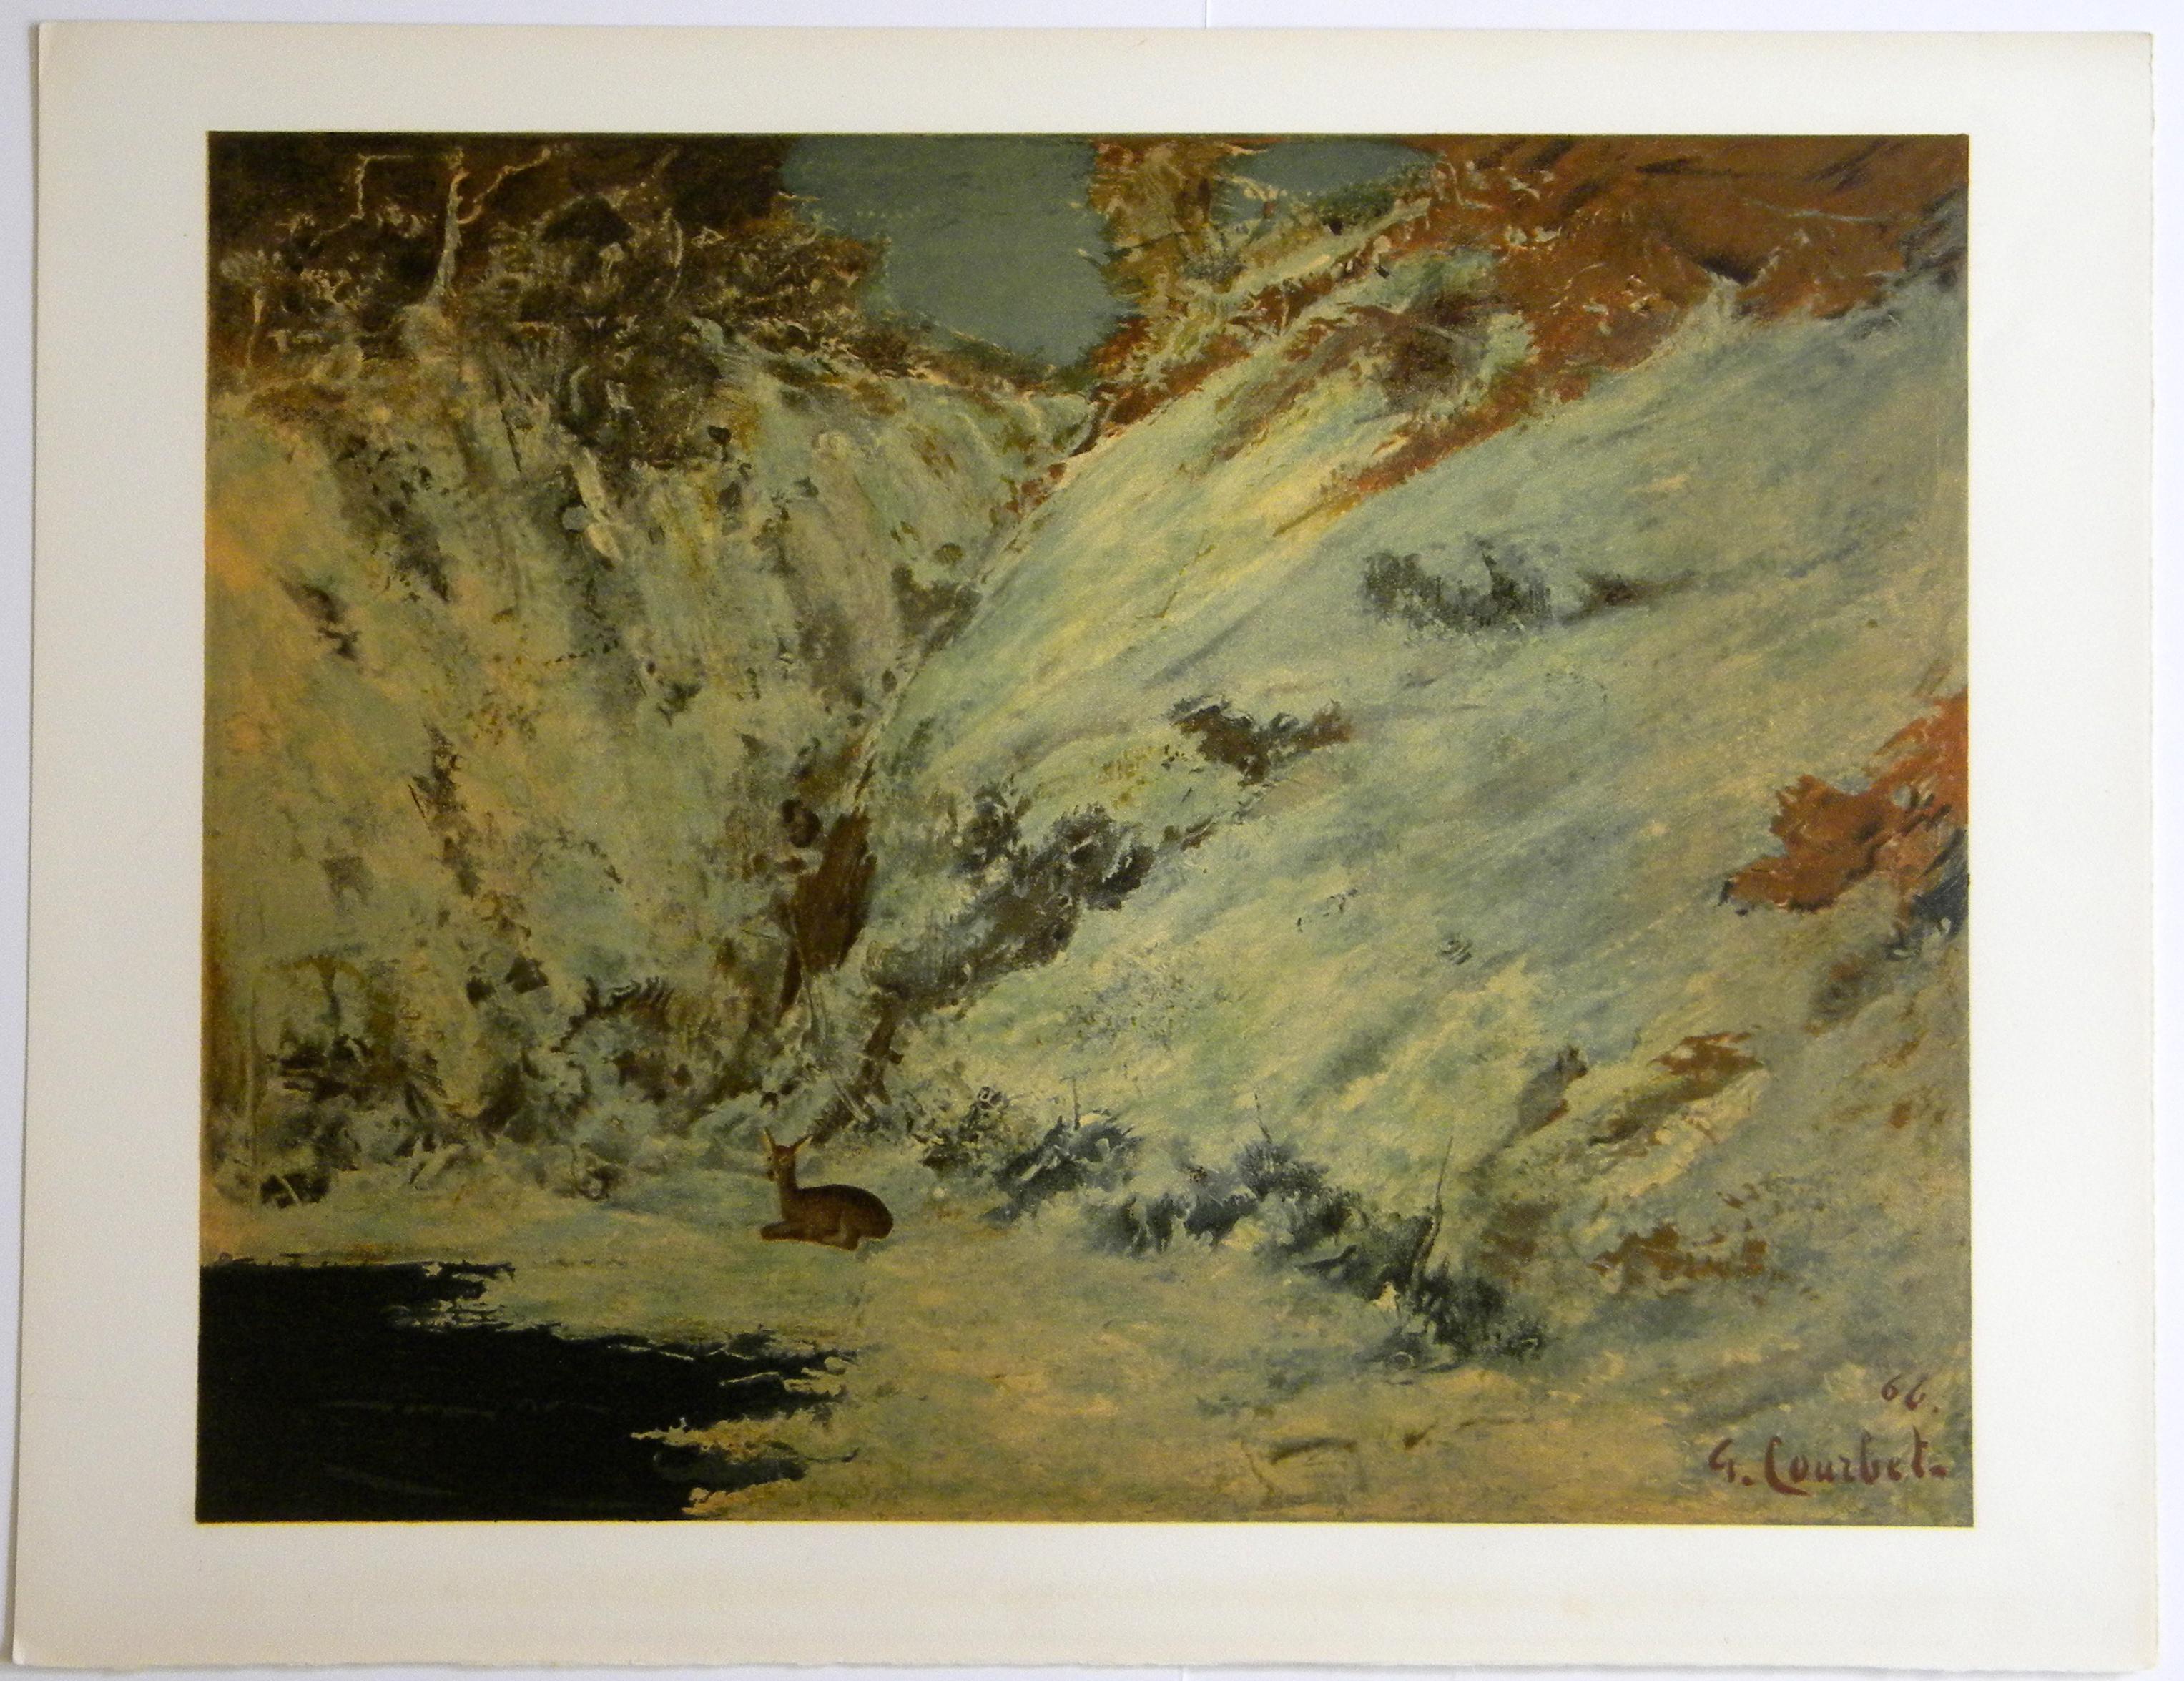 Medium: lithograph (after the 1866 Gustave Courbet painting). Printed in Paris on Arches paper at the Mourlot studio in 1973 in an edition of 1000 for the Collection Pierre Lévy deluxe portfolio. The image measures 16 1/2 x 21 inches (422 x 535 mm)